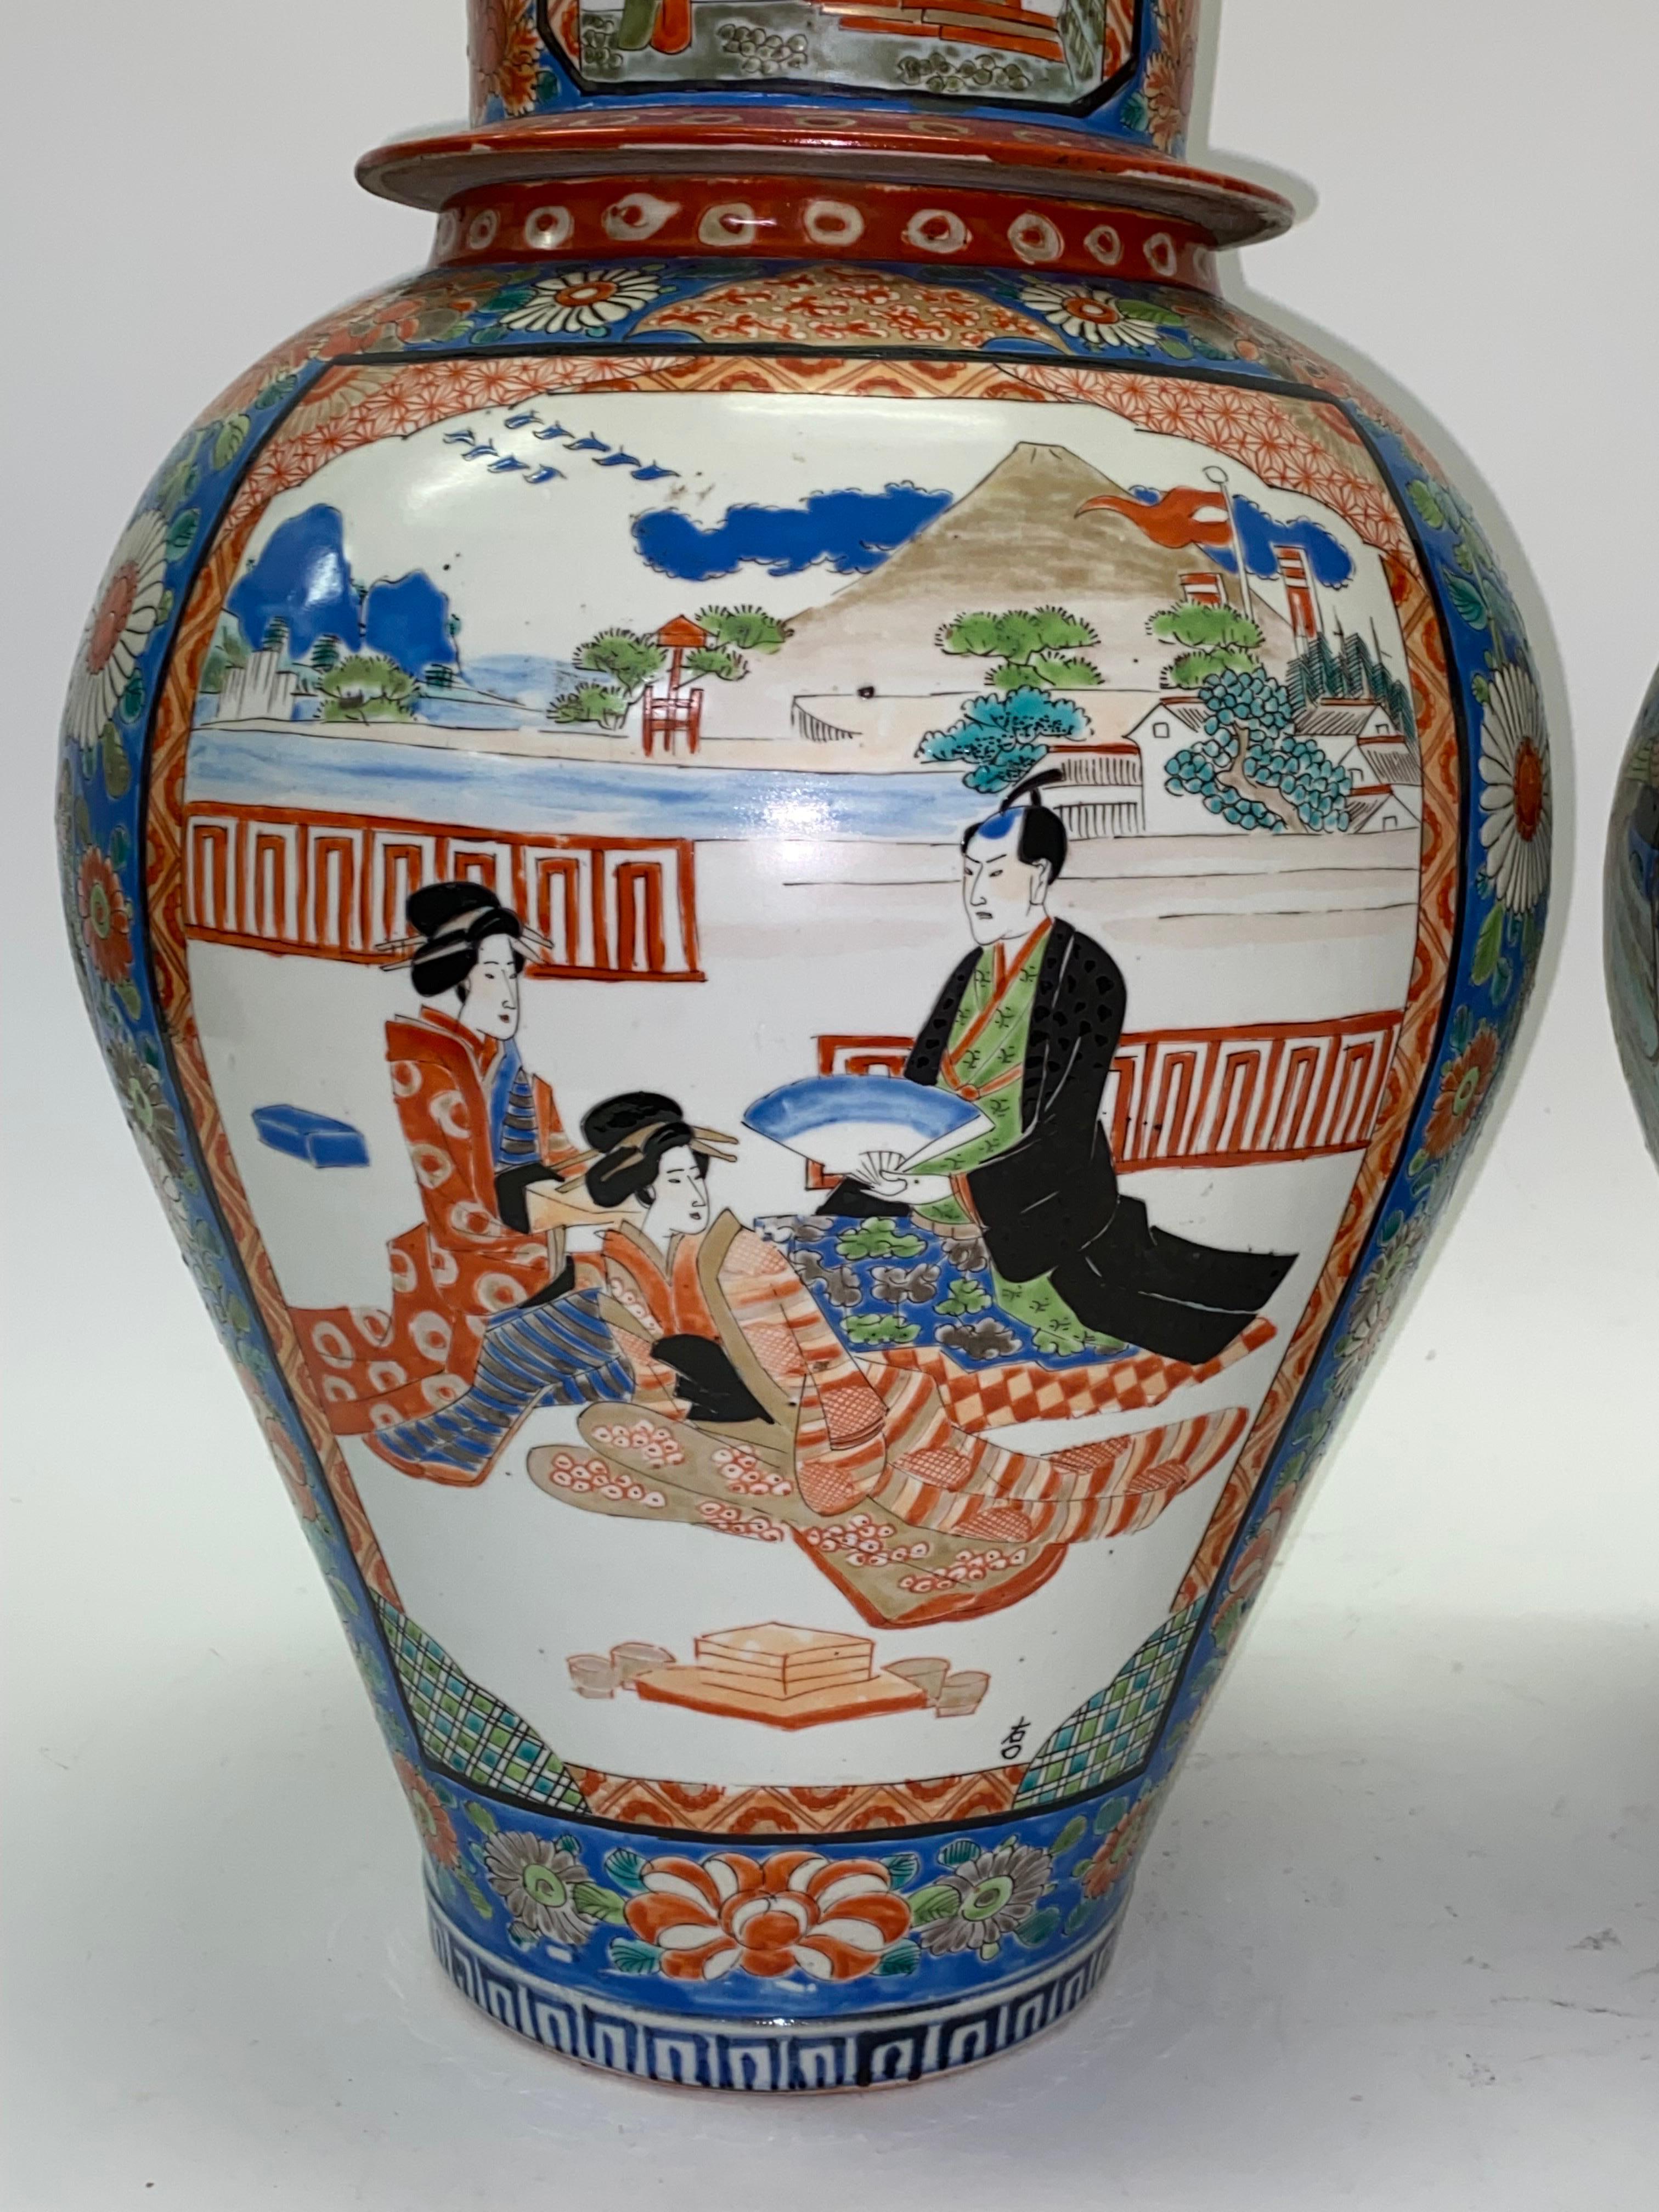 A large and very fine condition pair of antique Japanese Imari Ginger jars from the second half of the 19th century. Each is 12 inches in diameter and 19 inches tall. The colors are rich and the pieces are impressive. Inside the jars the previous